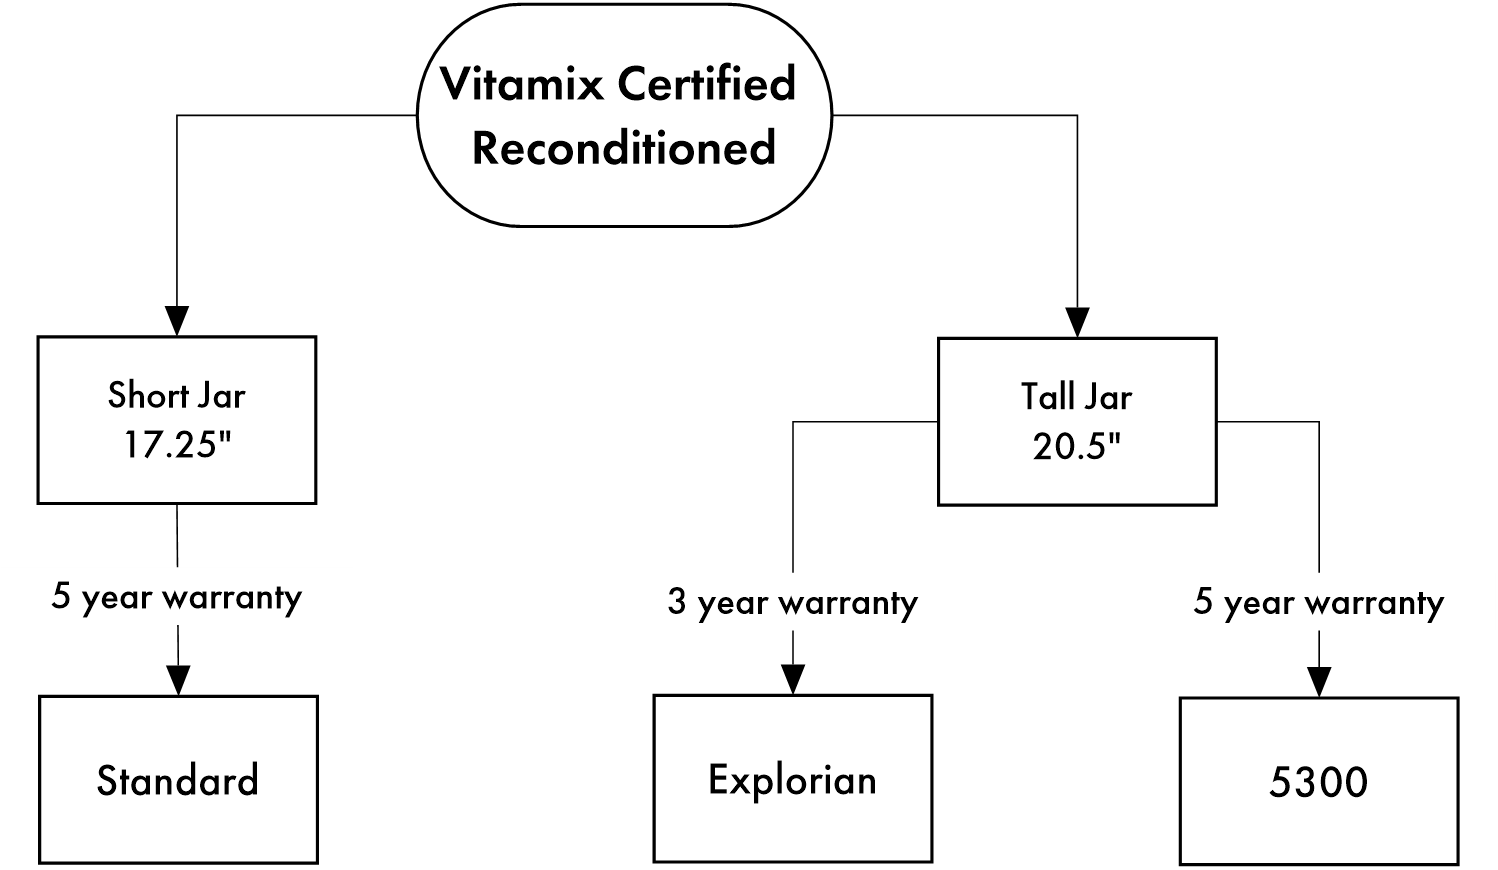 A flow chart to help you decide which Vitamix certified reconditioned model to buy